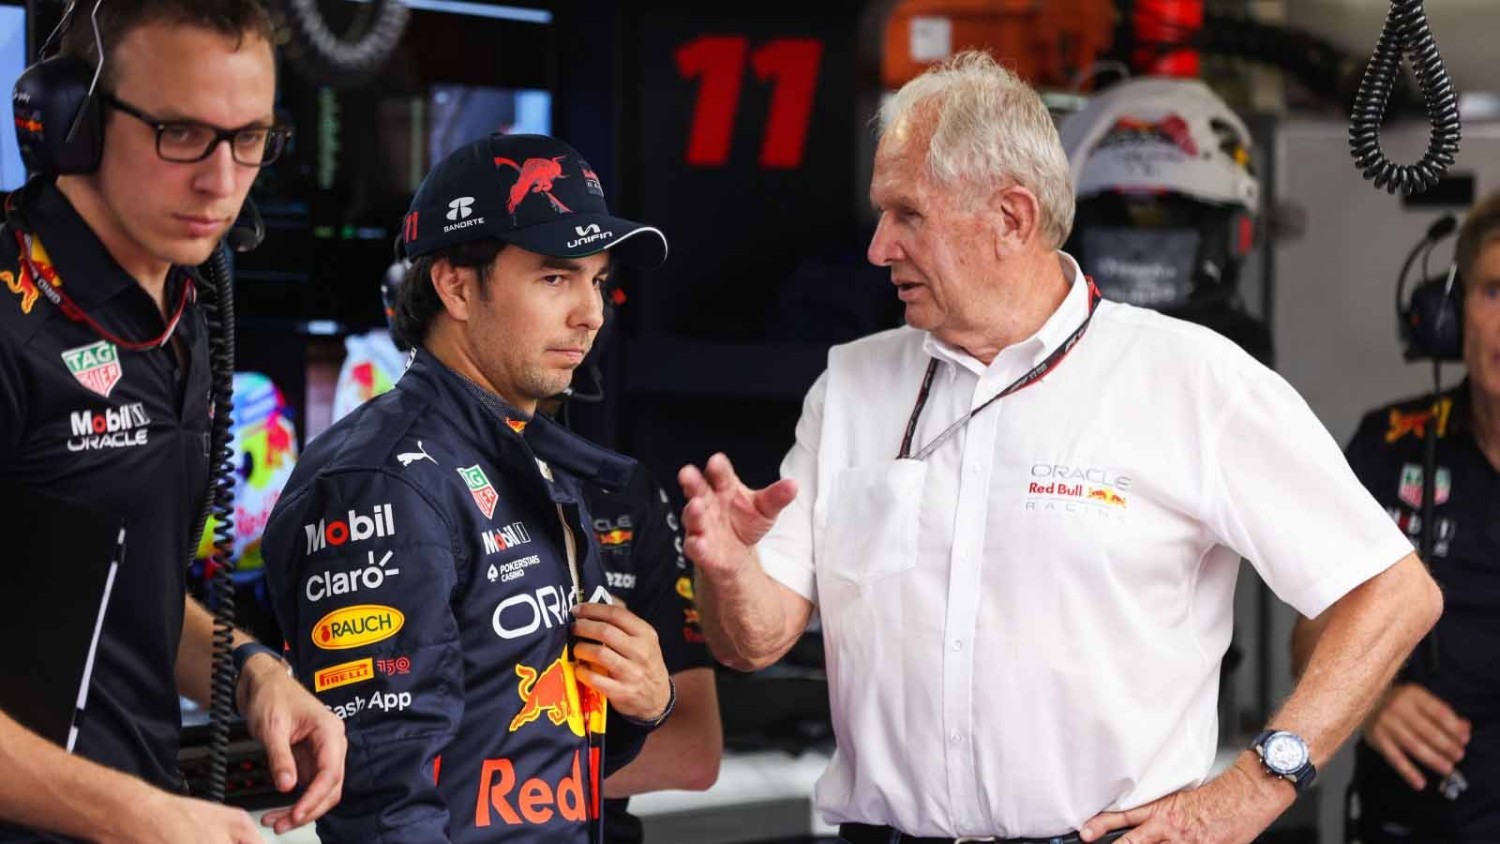 Sergio Perez talks to Dr. Helmut Marko. "Perez has some weaknesses, this can’t be denied," said a disgusted Marko